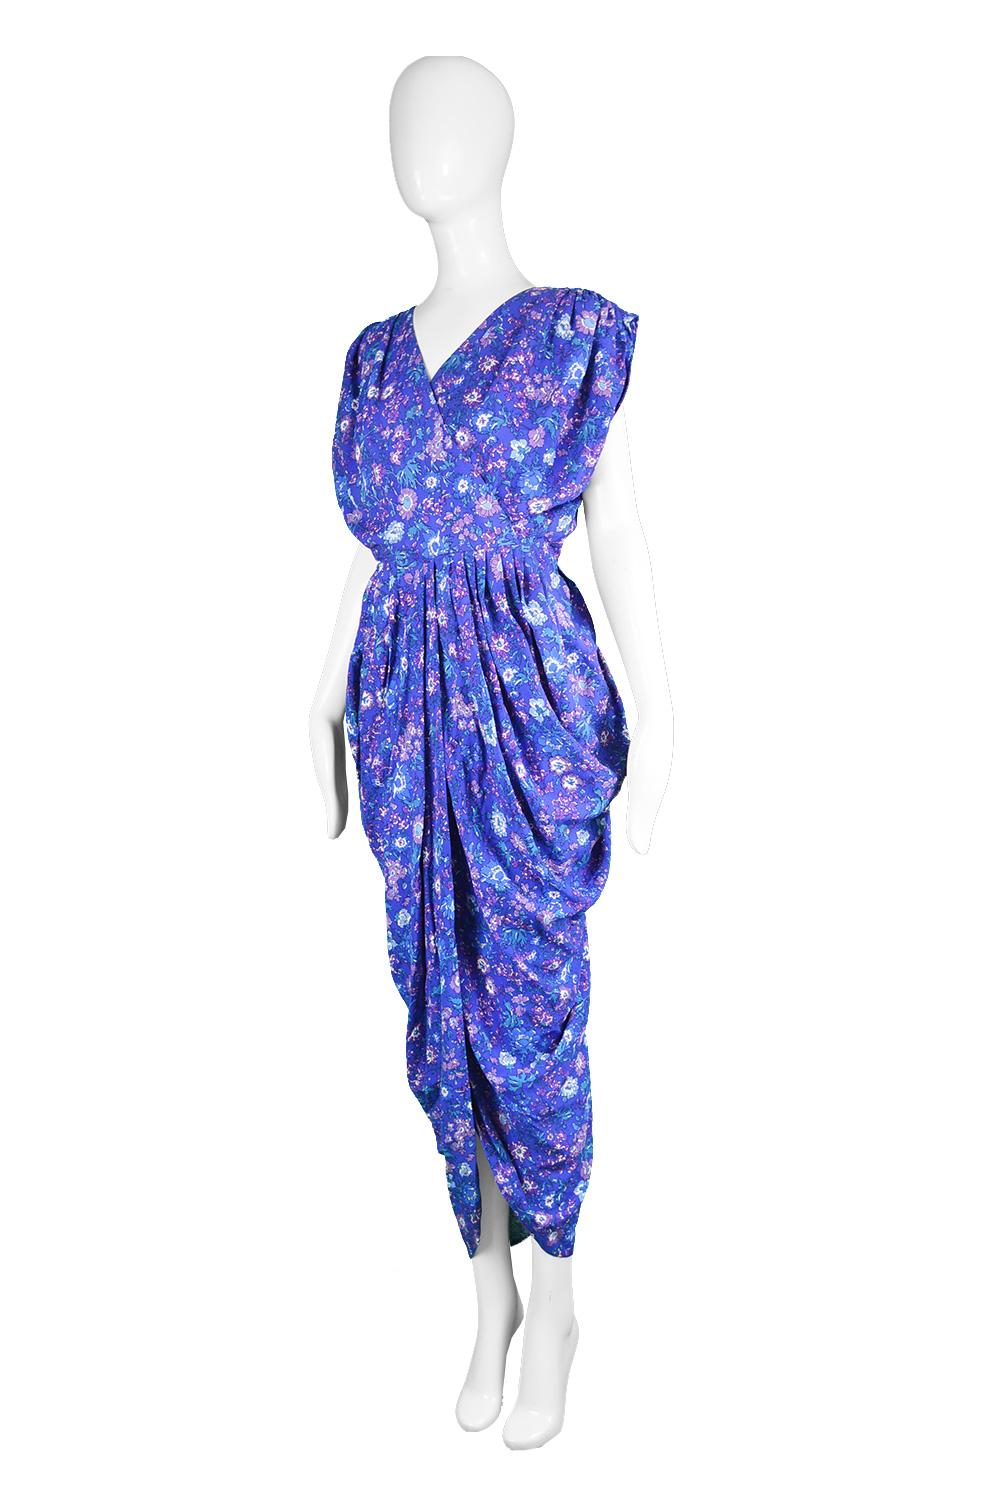 Women's Droopy & Brown Draped Blue Floral Print Vintage Viscose Maxi Dress, 1980s For Sale